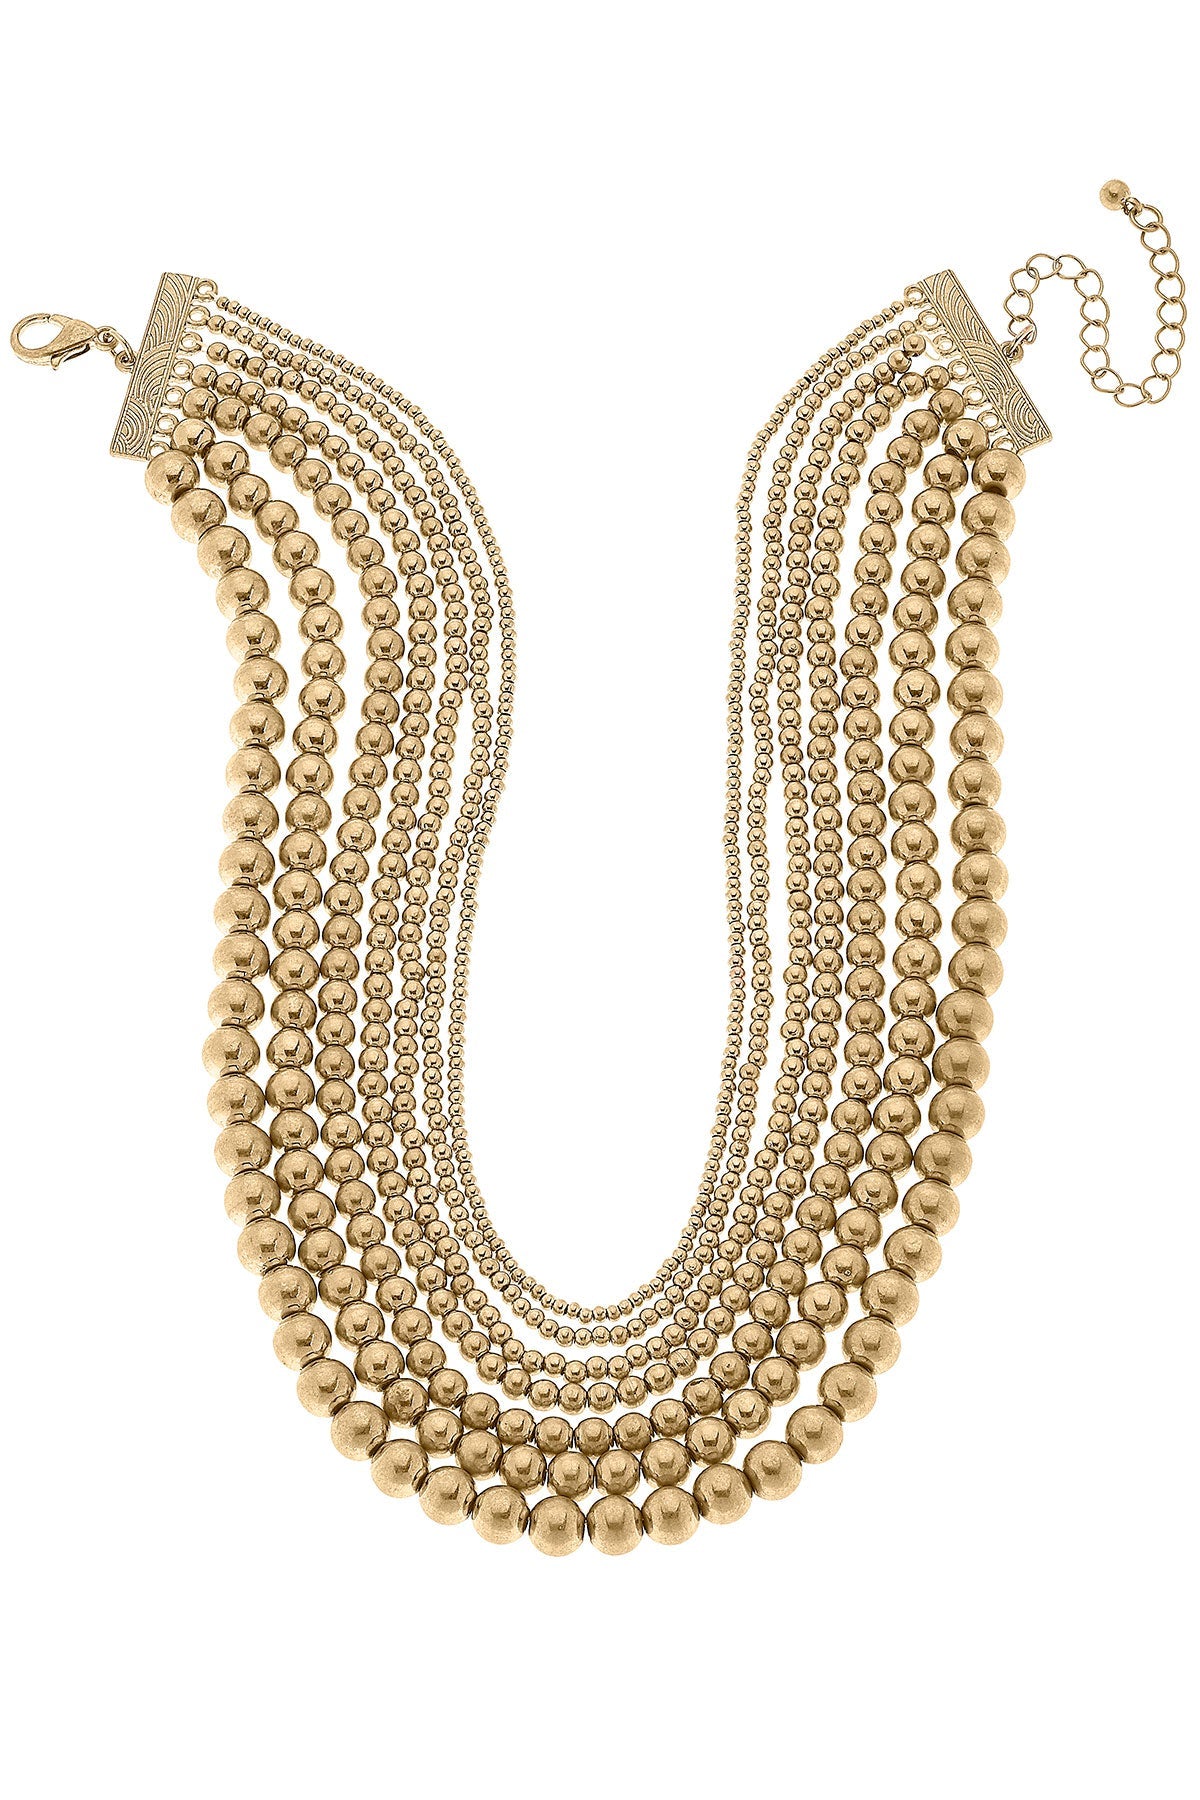 Aubrielle Metal Ball Bead Layered Necklace in Worn Gold by CANVAS